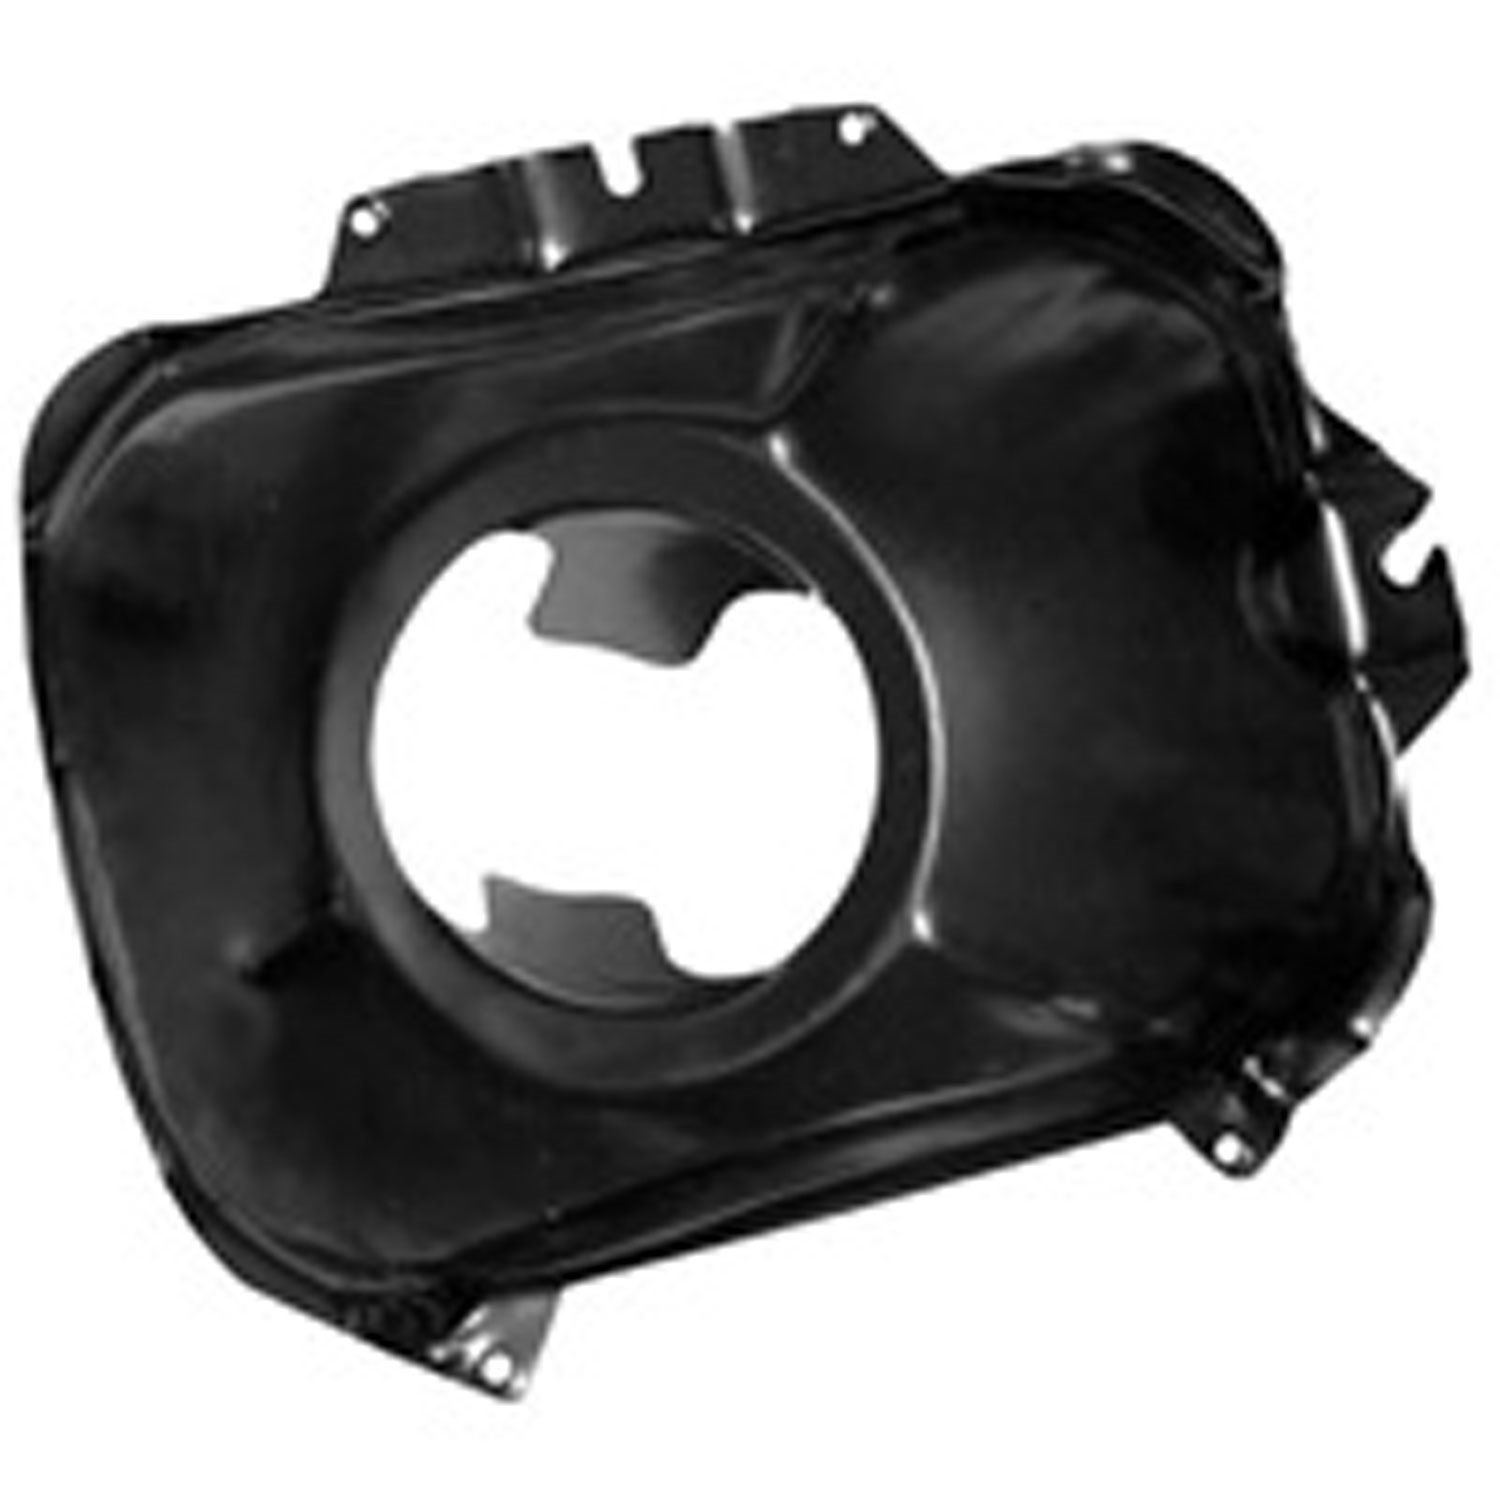 Replacement headlight housing, Fits left side on 84-96 Jeep Cherokee XJ and 87-95 Wrangler Y